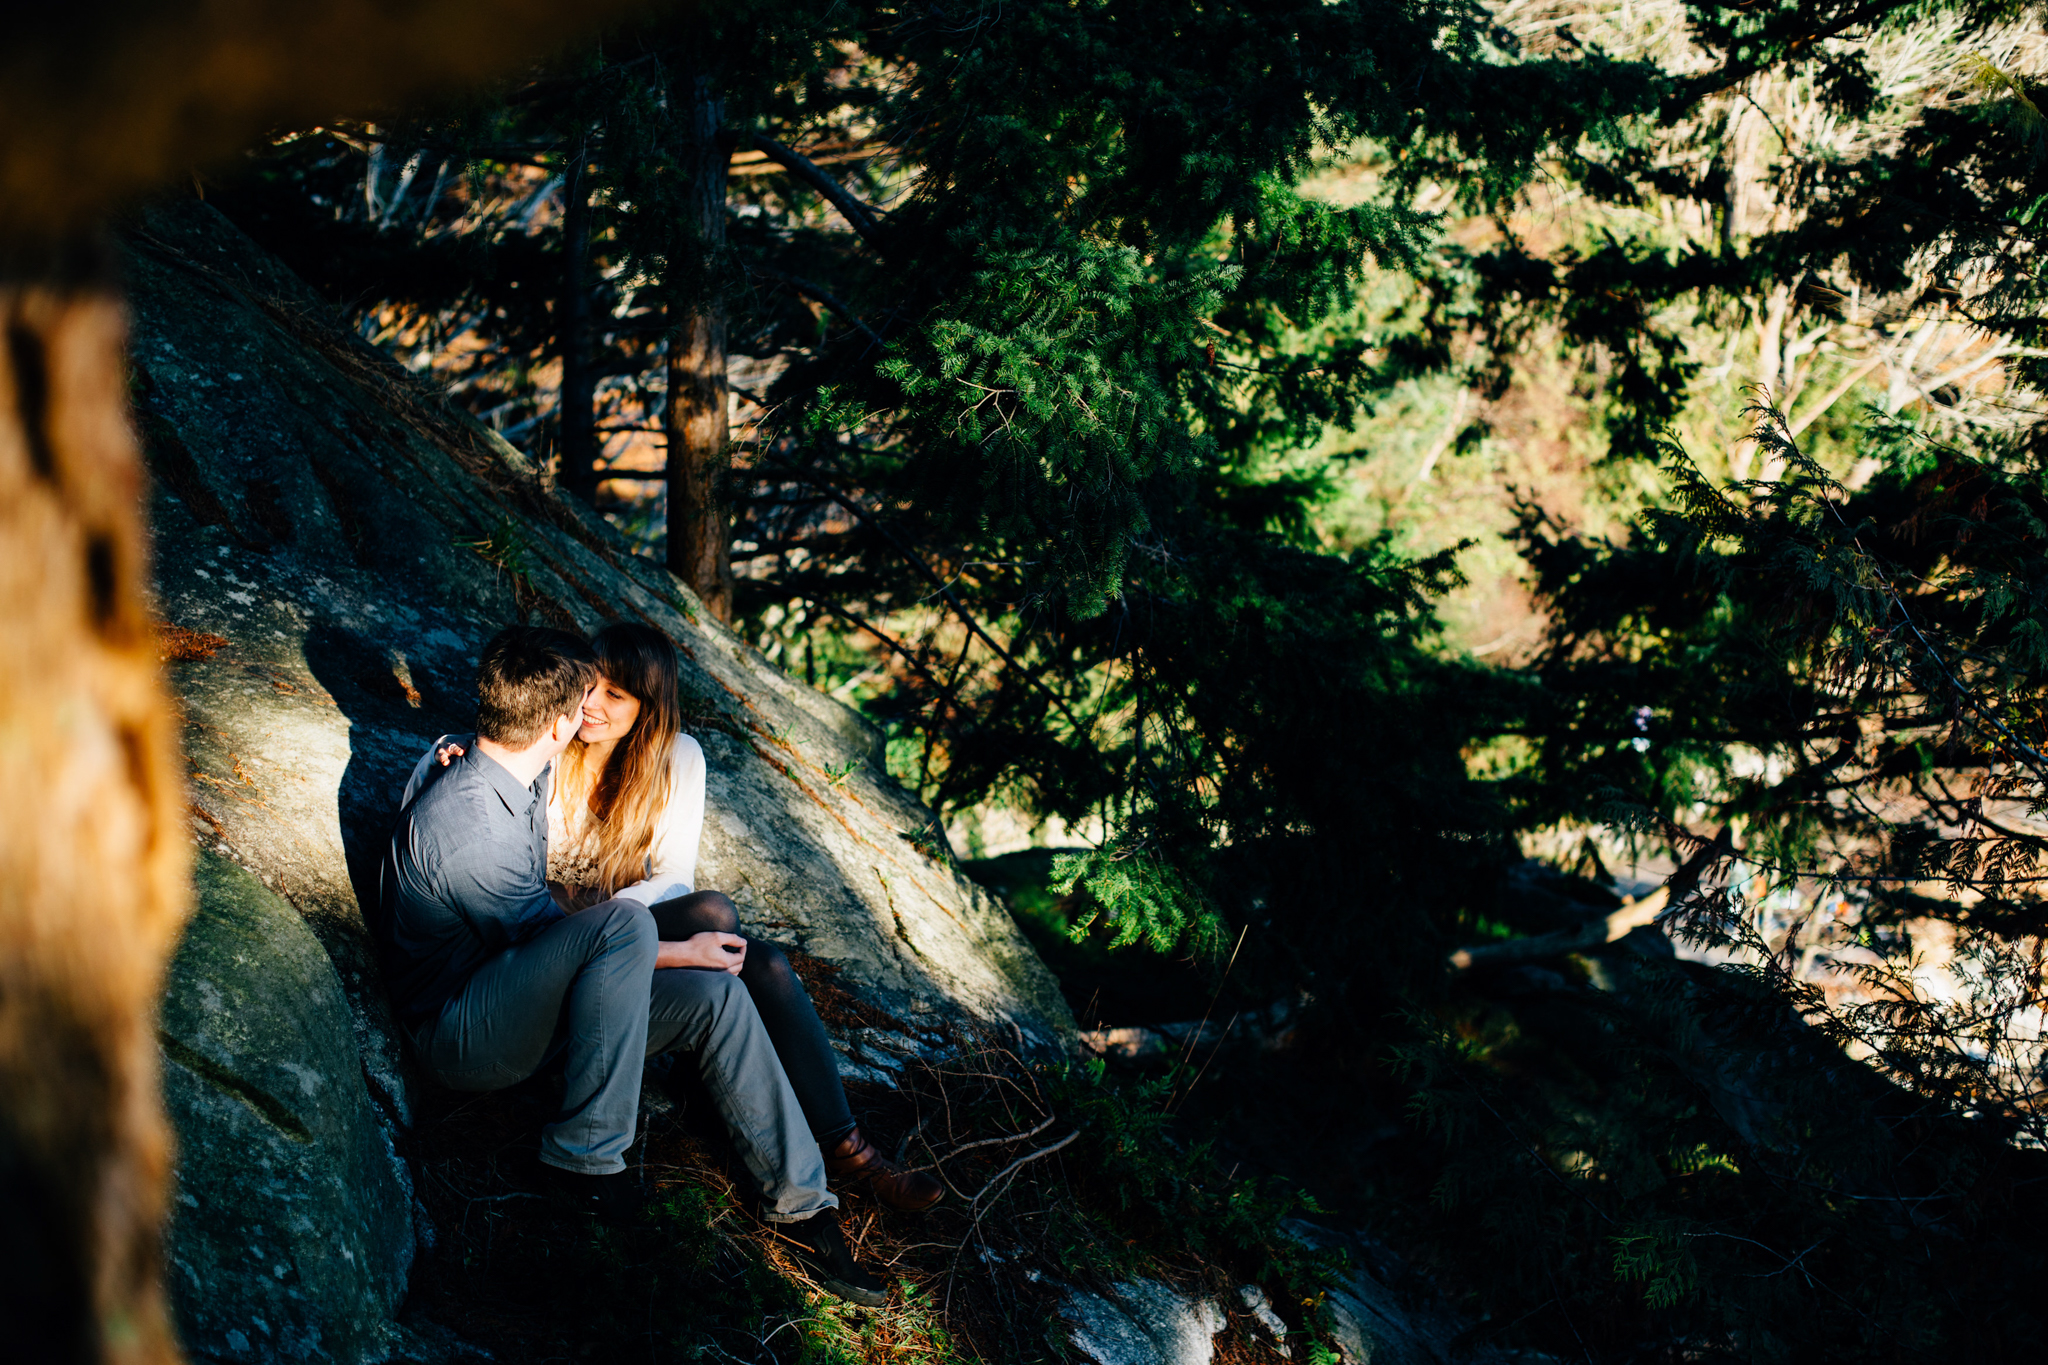 Vancouver Whytecliff Park Engagement Photographer - Emmy Lou Virginia Photography-31.jpg